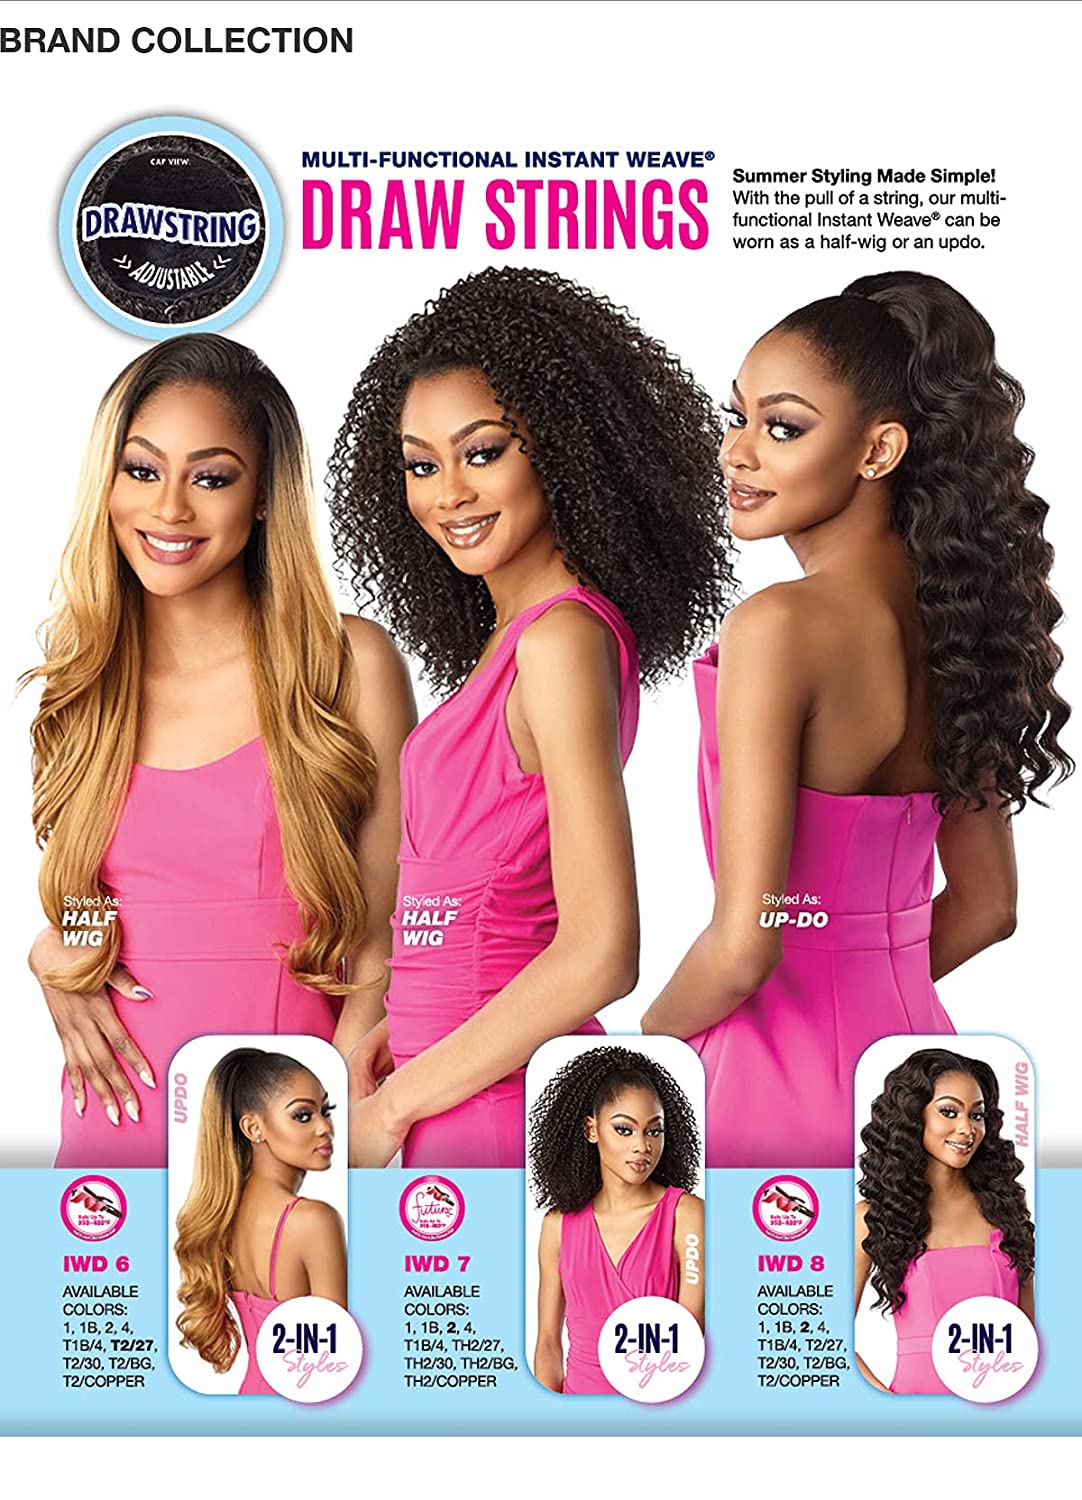 Sensationnel hair extensions - Instant weave drawstring cap 008 Find Your New Look Today!